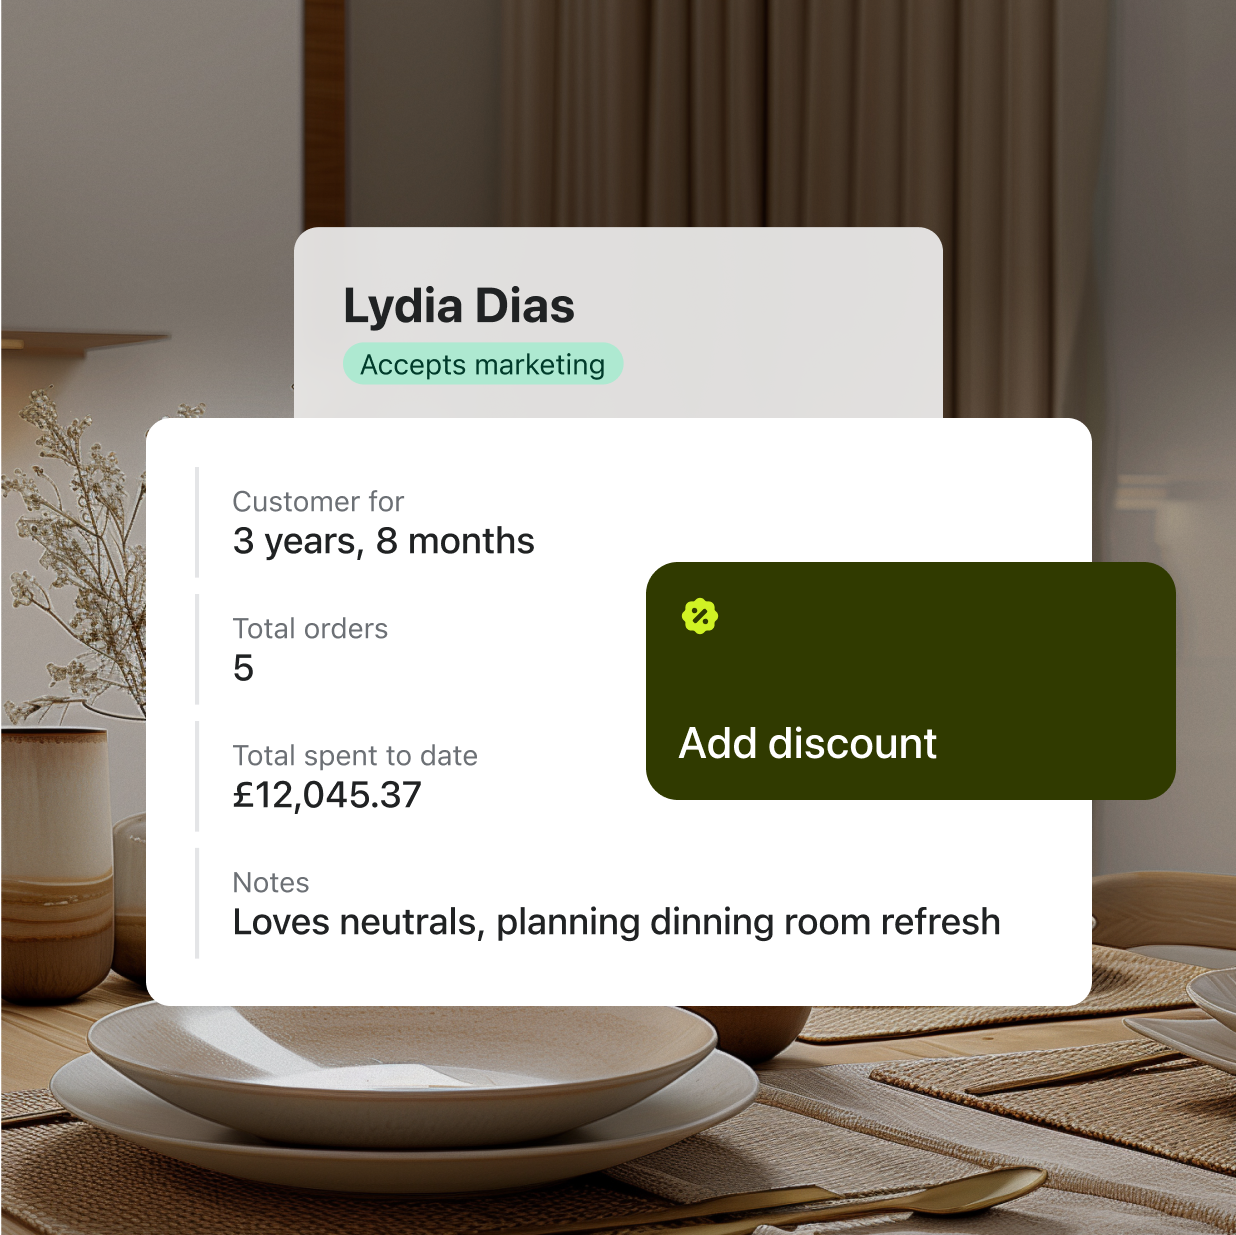 A customer profile for Lydia Dias. In the profile is the following information. Customer for: 3 years, 8 months. Total orders: 5. Total spent to date: $12,045.37. Notes: loves neutrals, planning a dining room refresh.